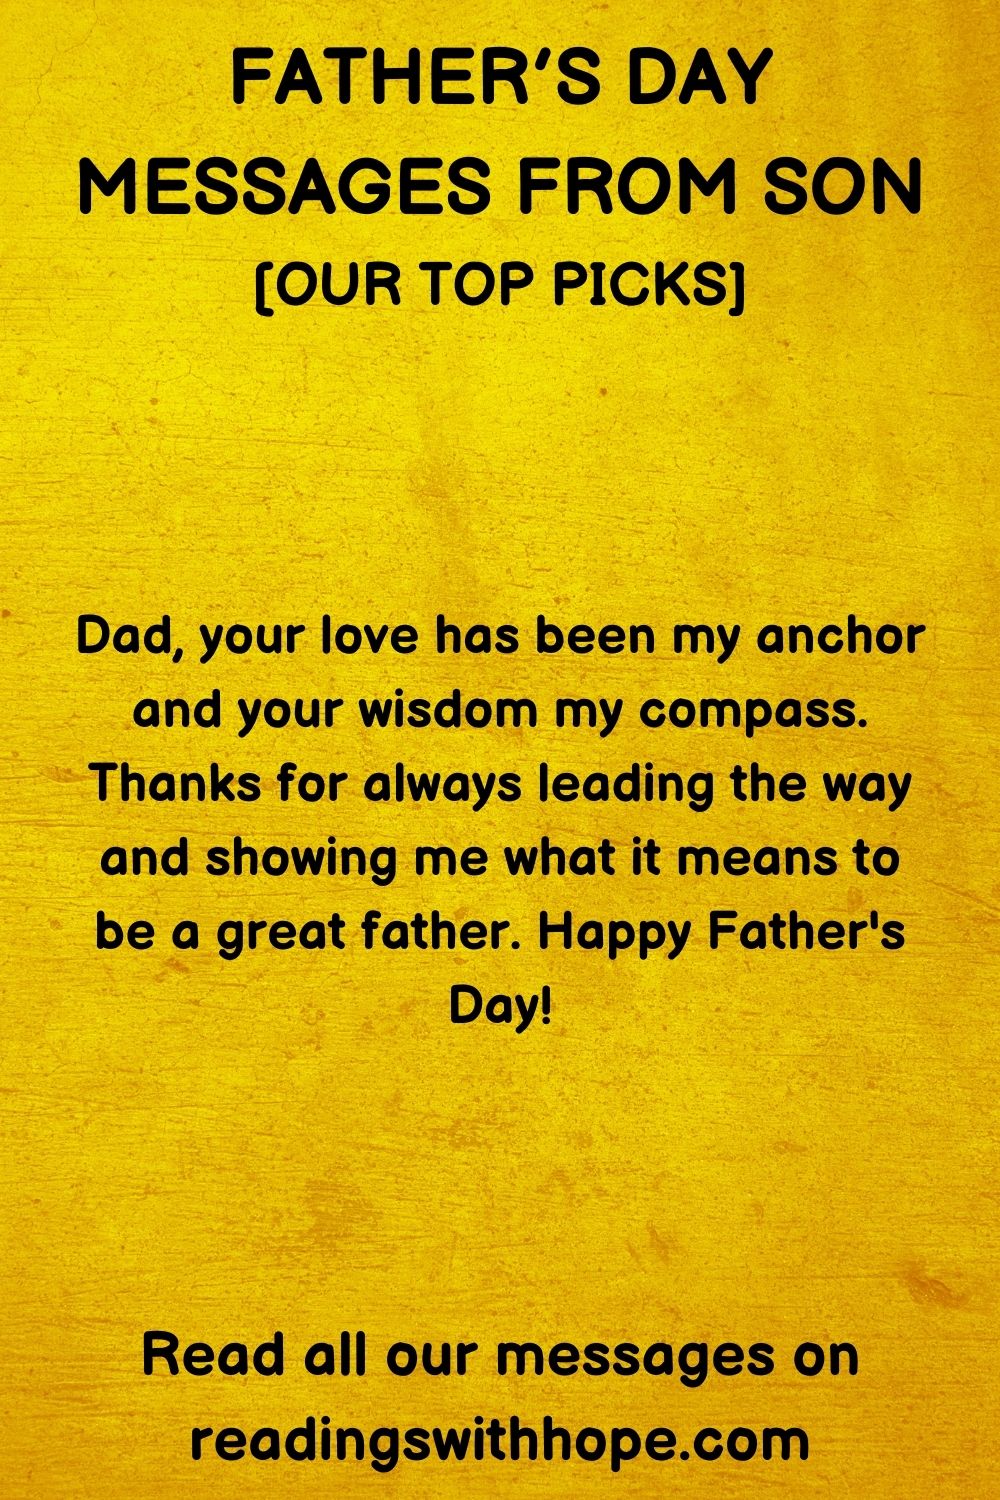 father's day message from son